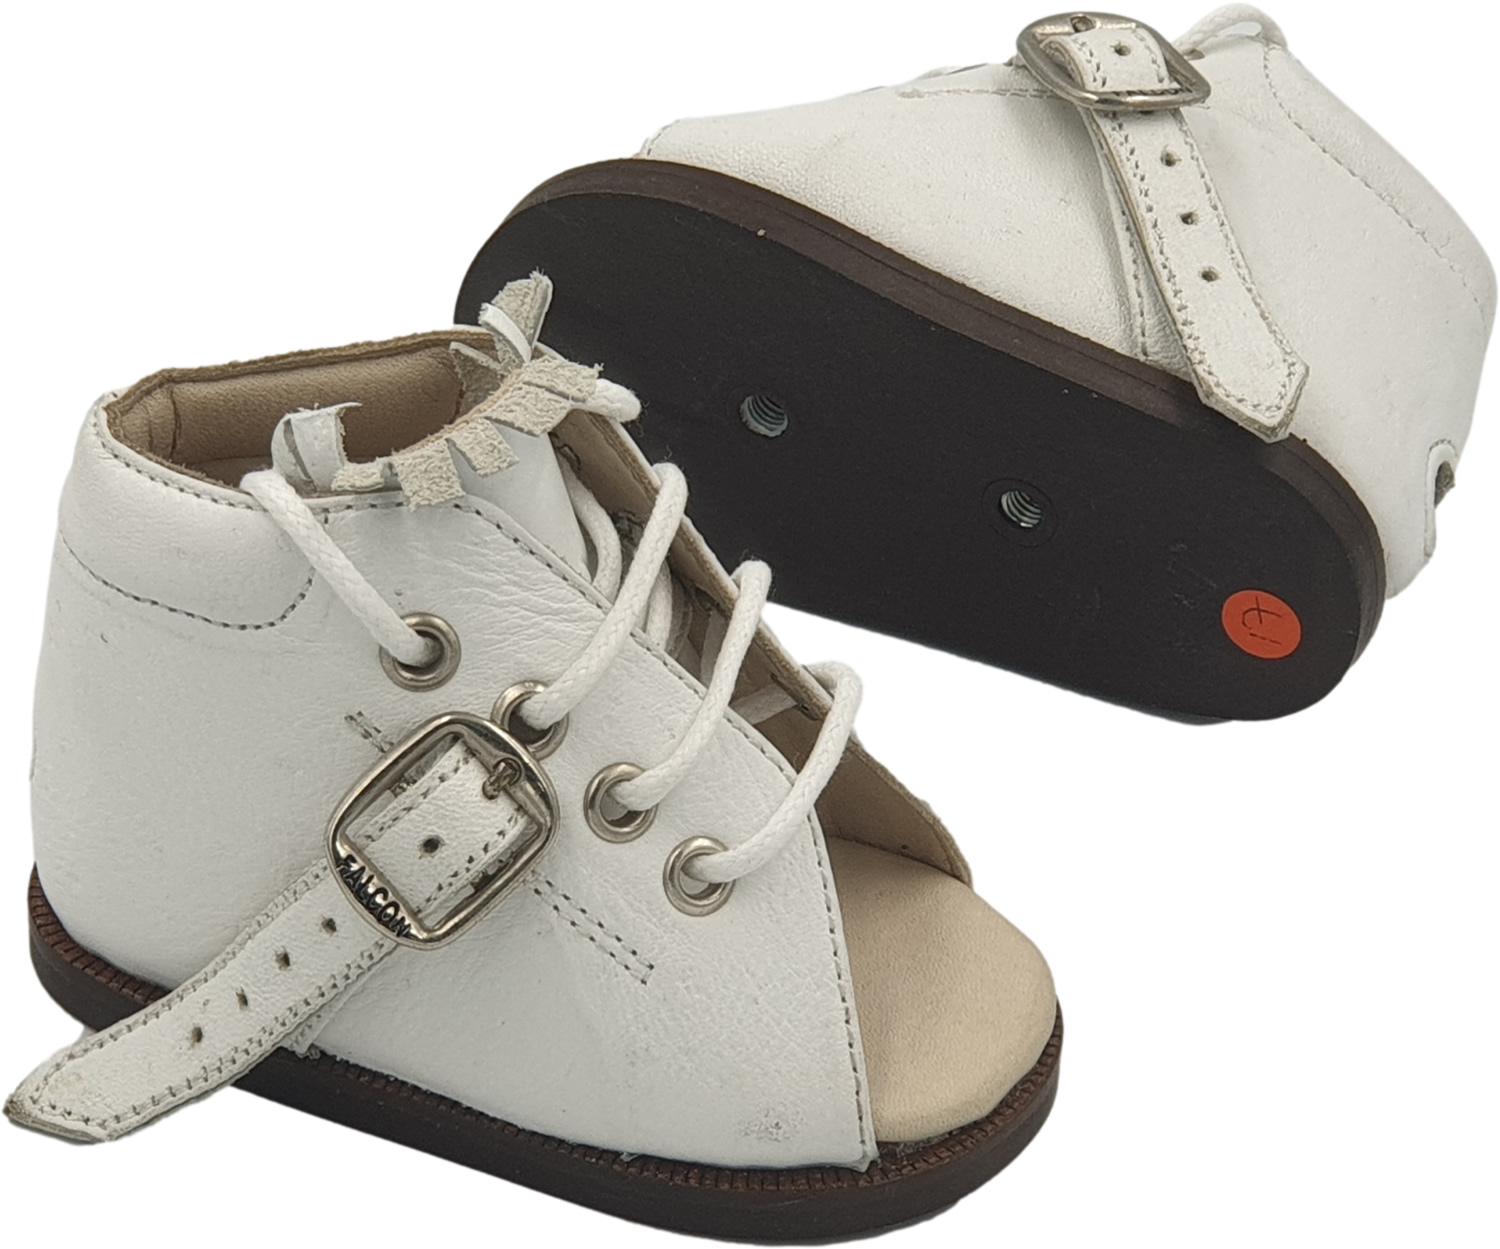 Shoes for Kids with Clubfoot | Give These Life Changing Shoes a Try! |  Fitting Children's Shoes